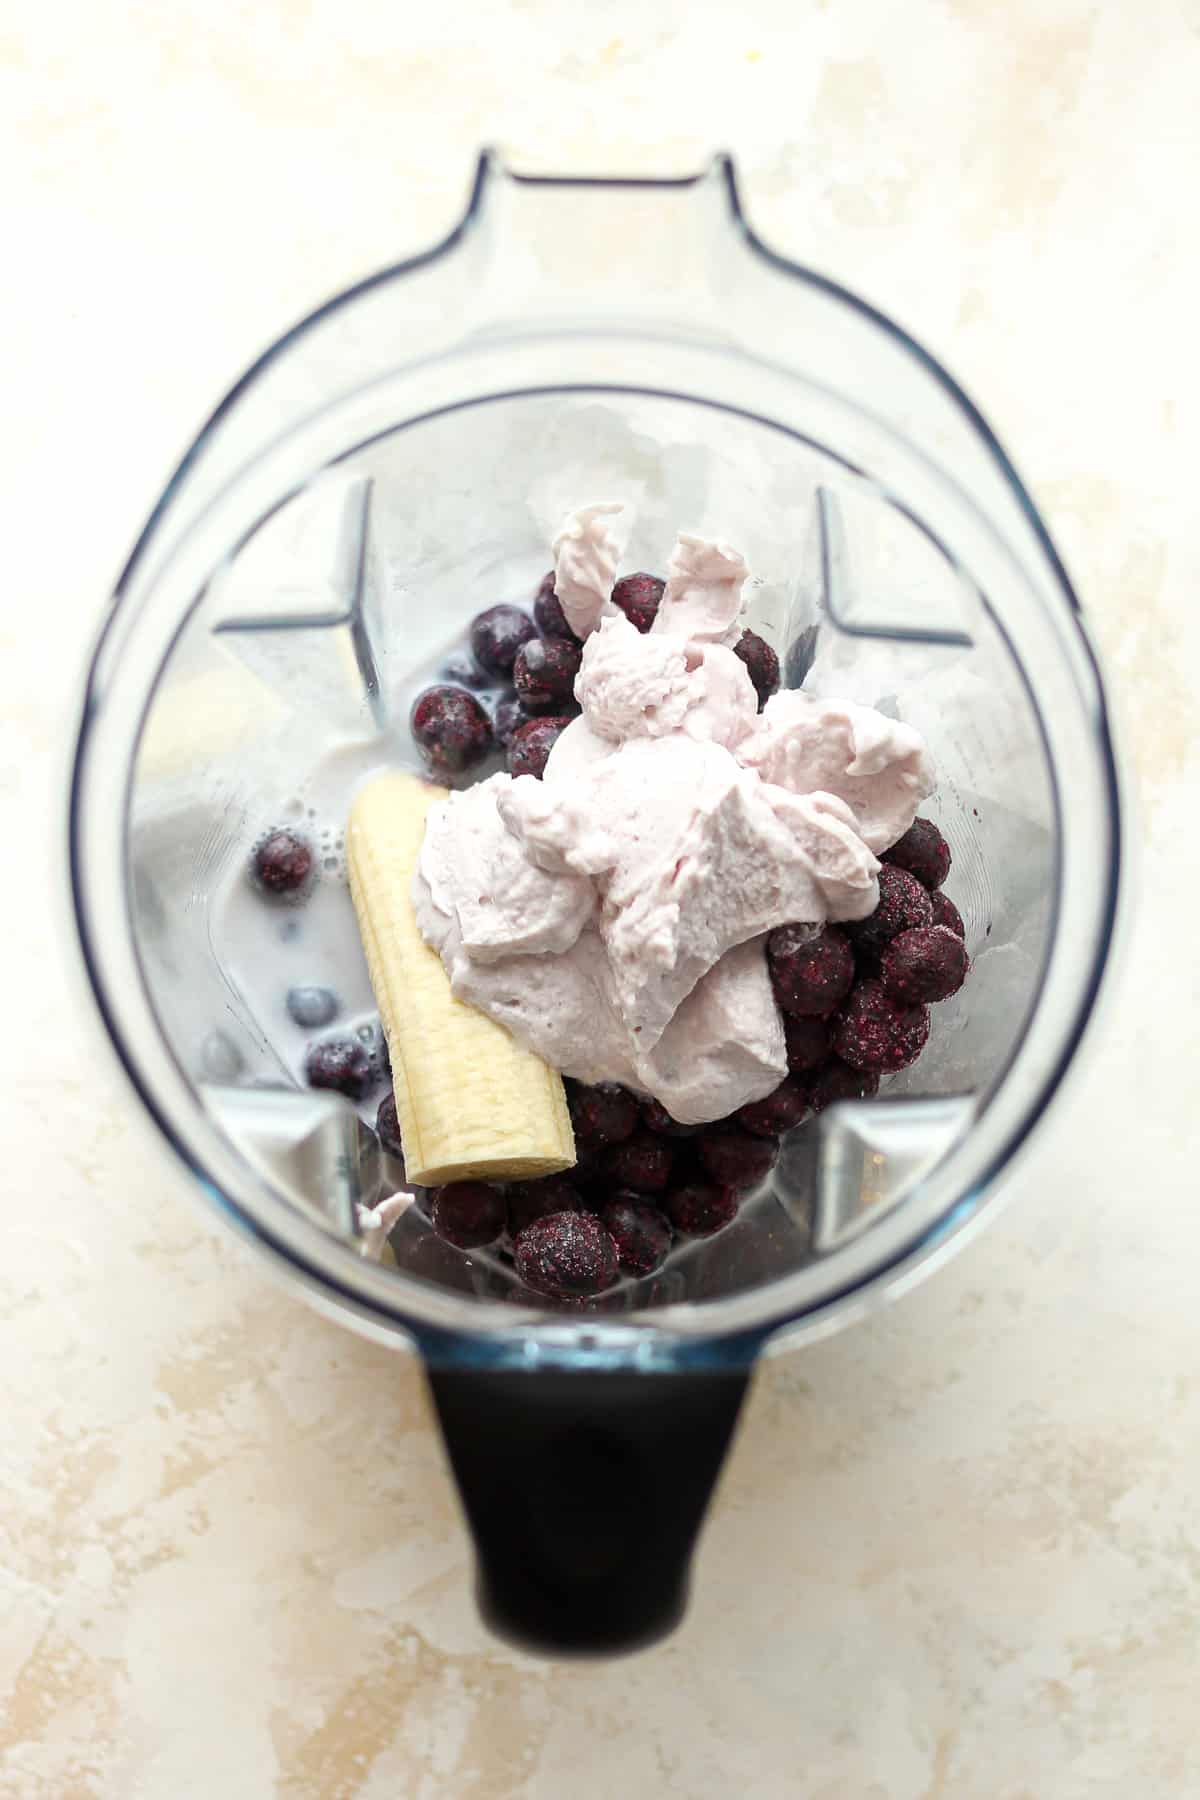 A blender of the blueberry ingredients.